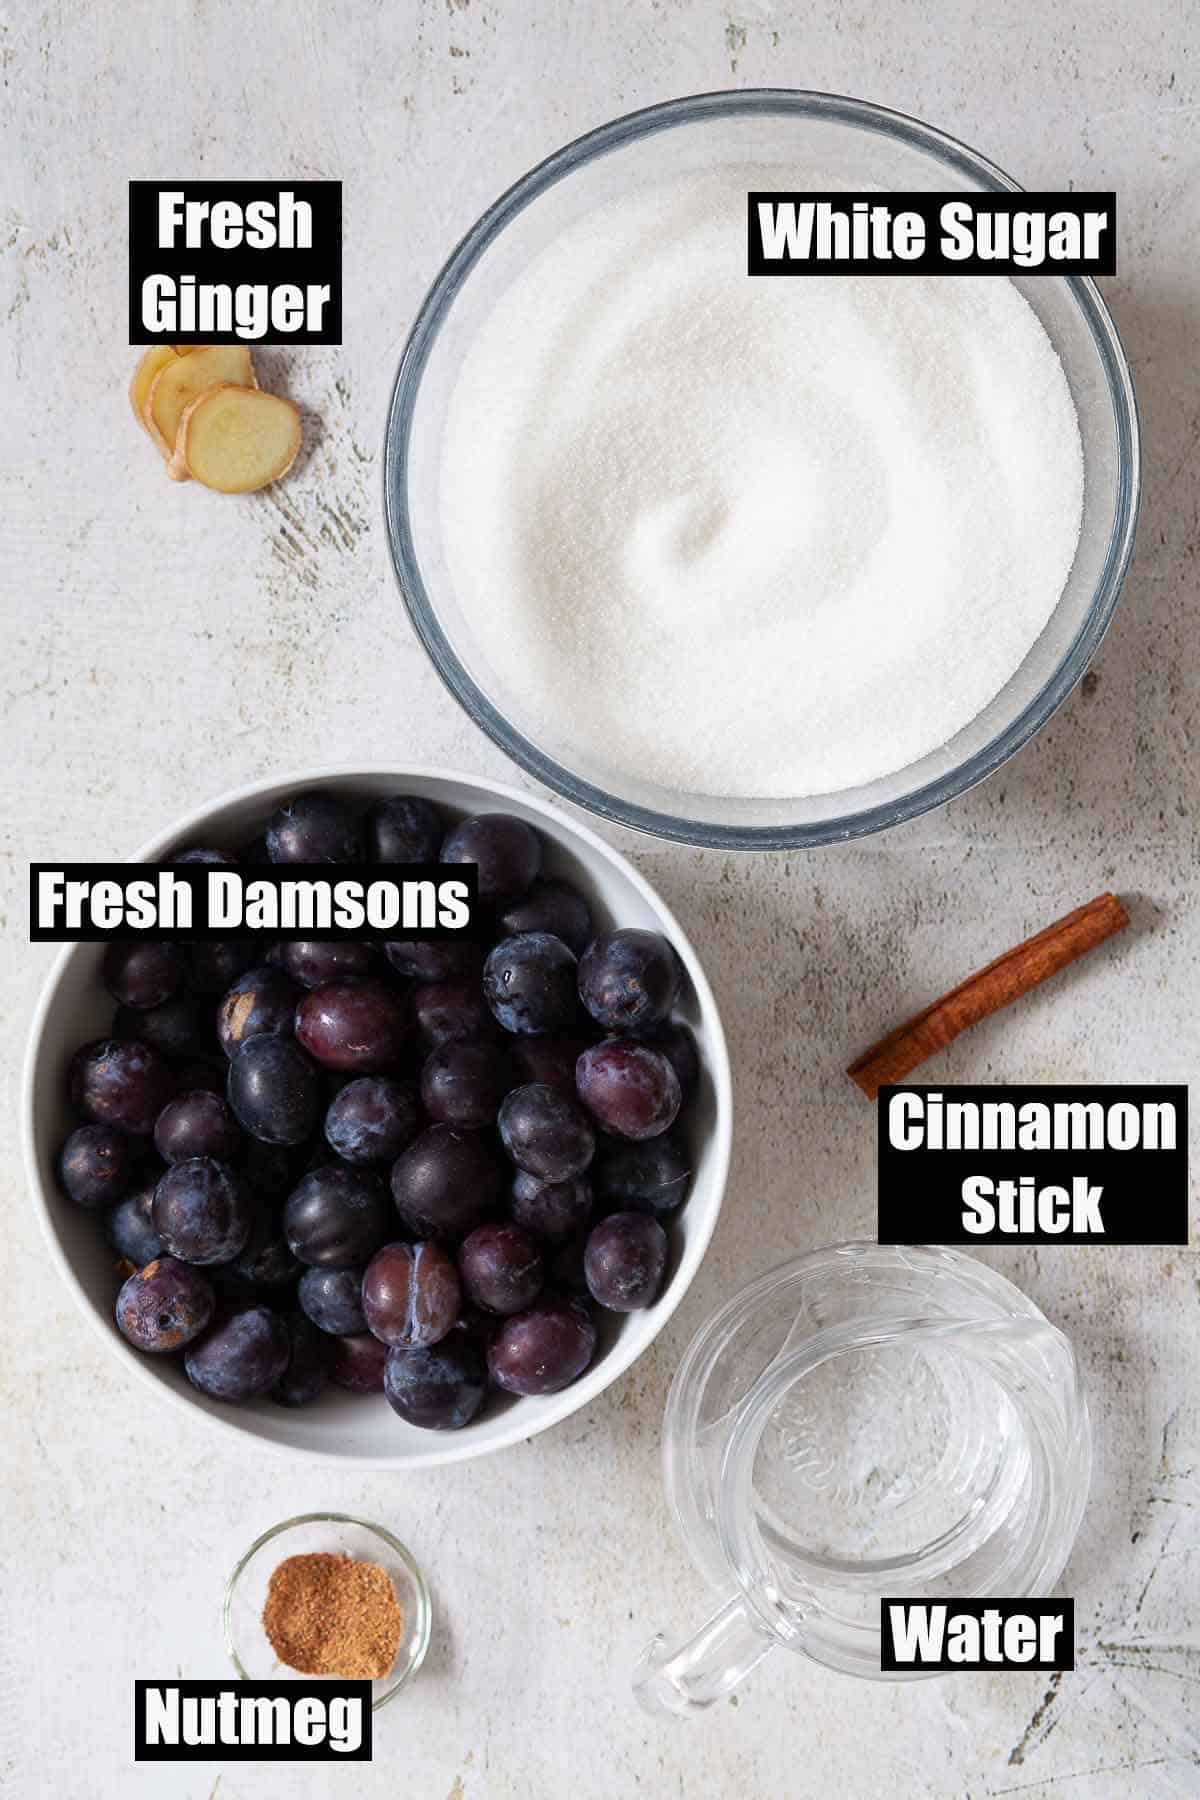 Ingredients for damson preserve with text labels.